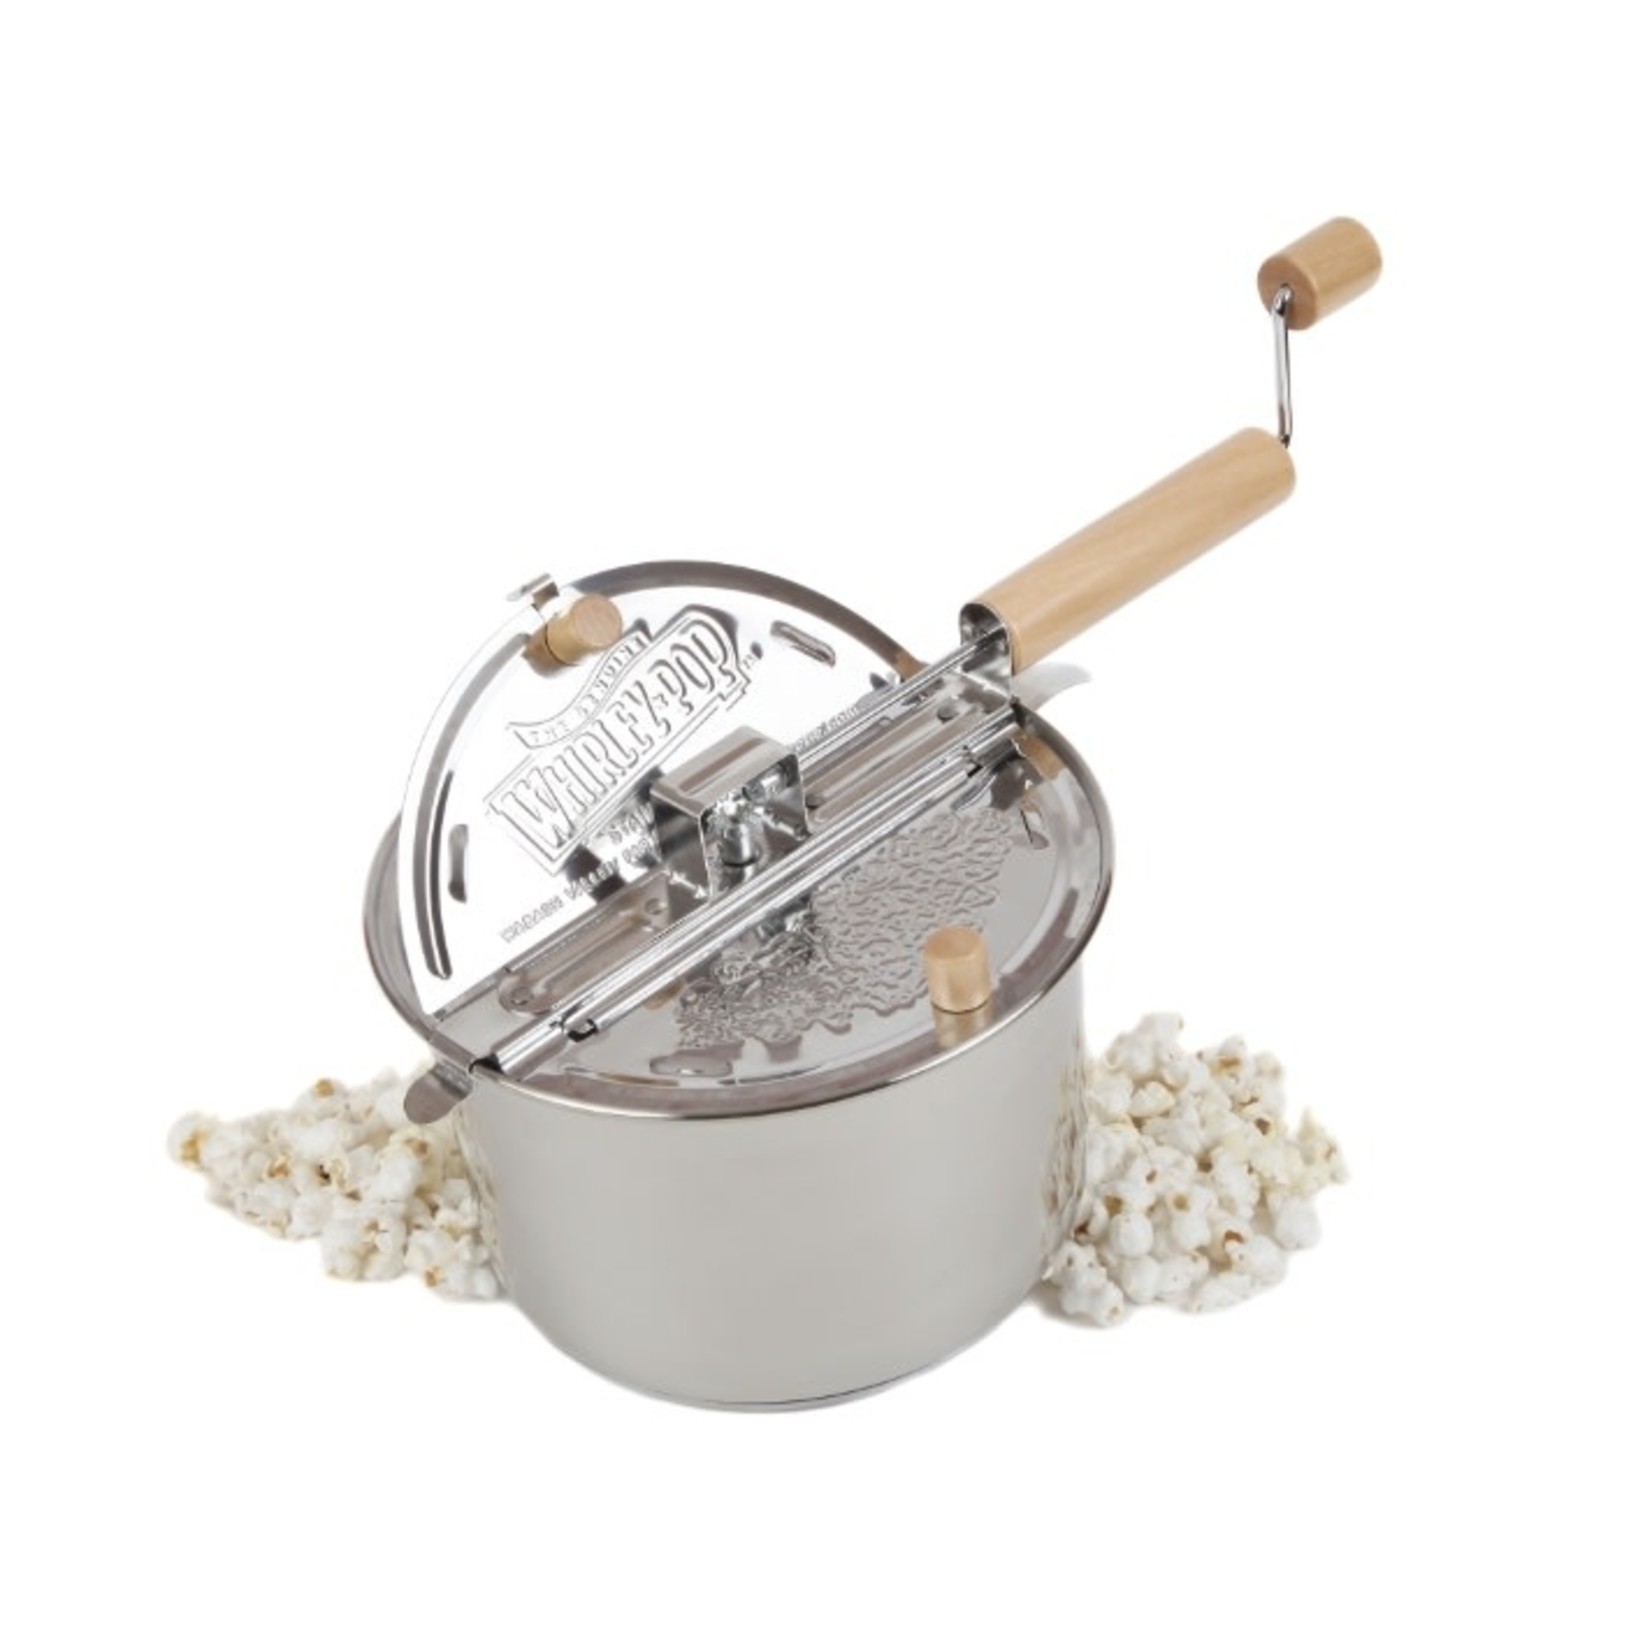 WABASH VALLEY FARMS WABASH Whirley Pop - Stainless Steel